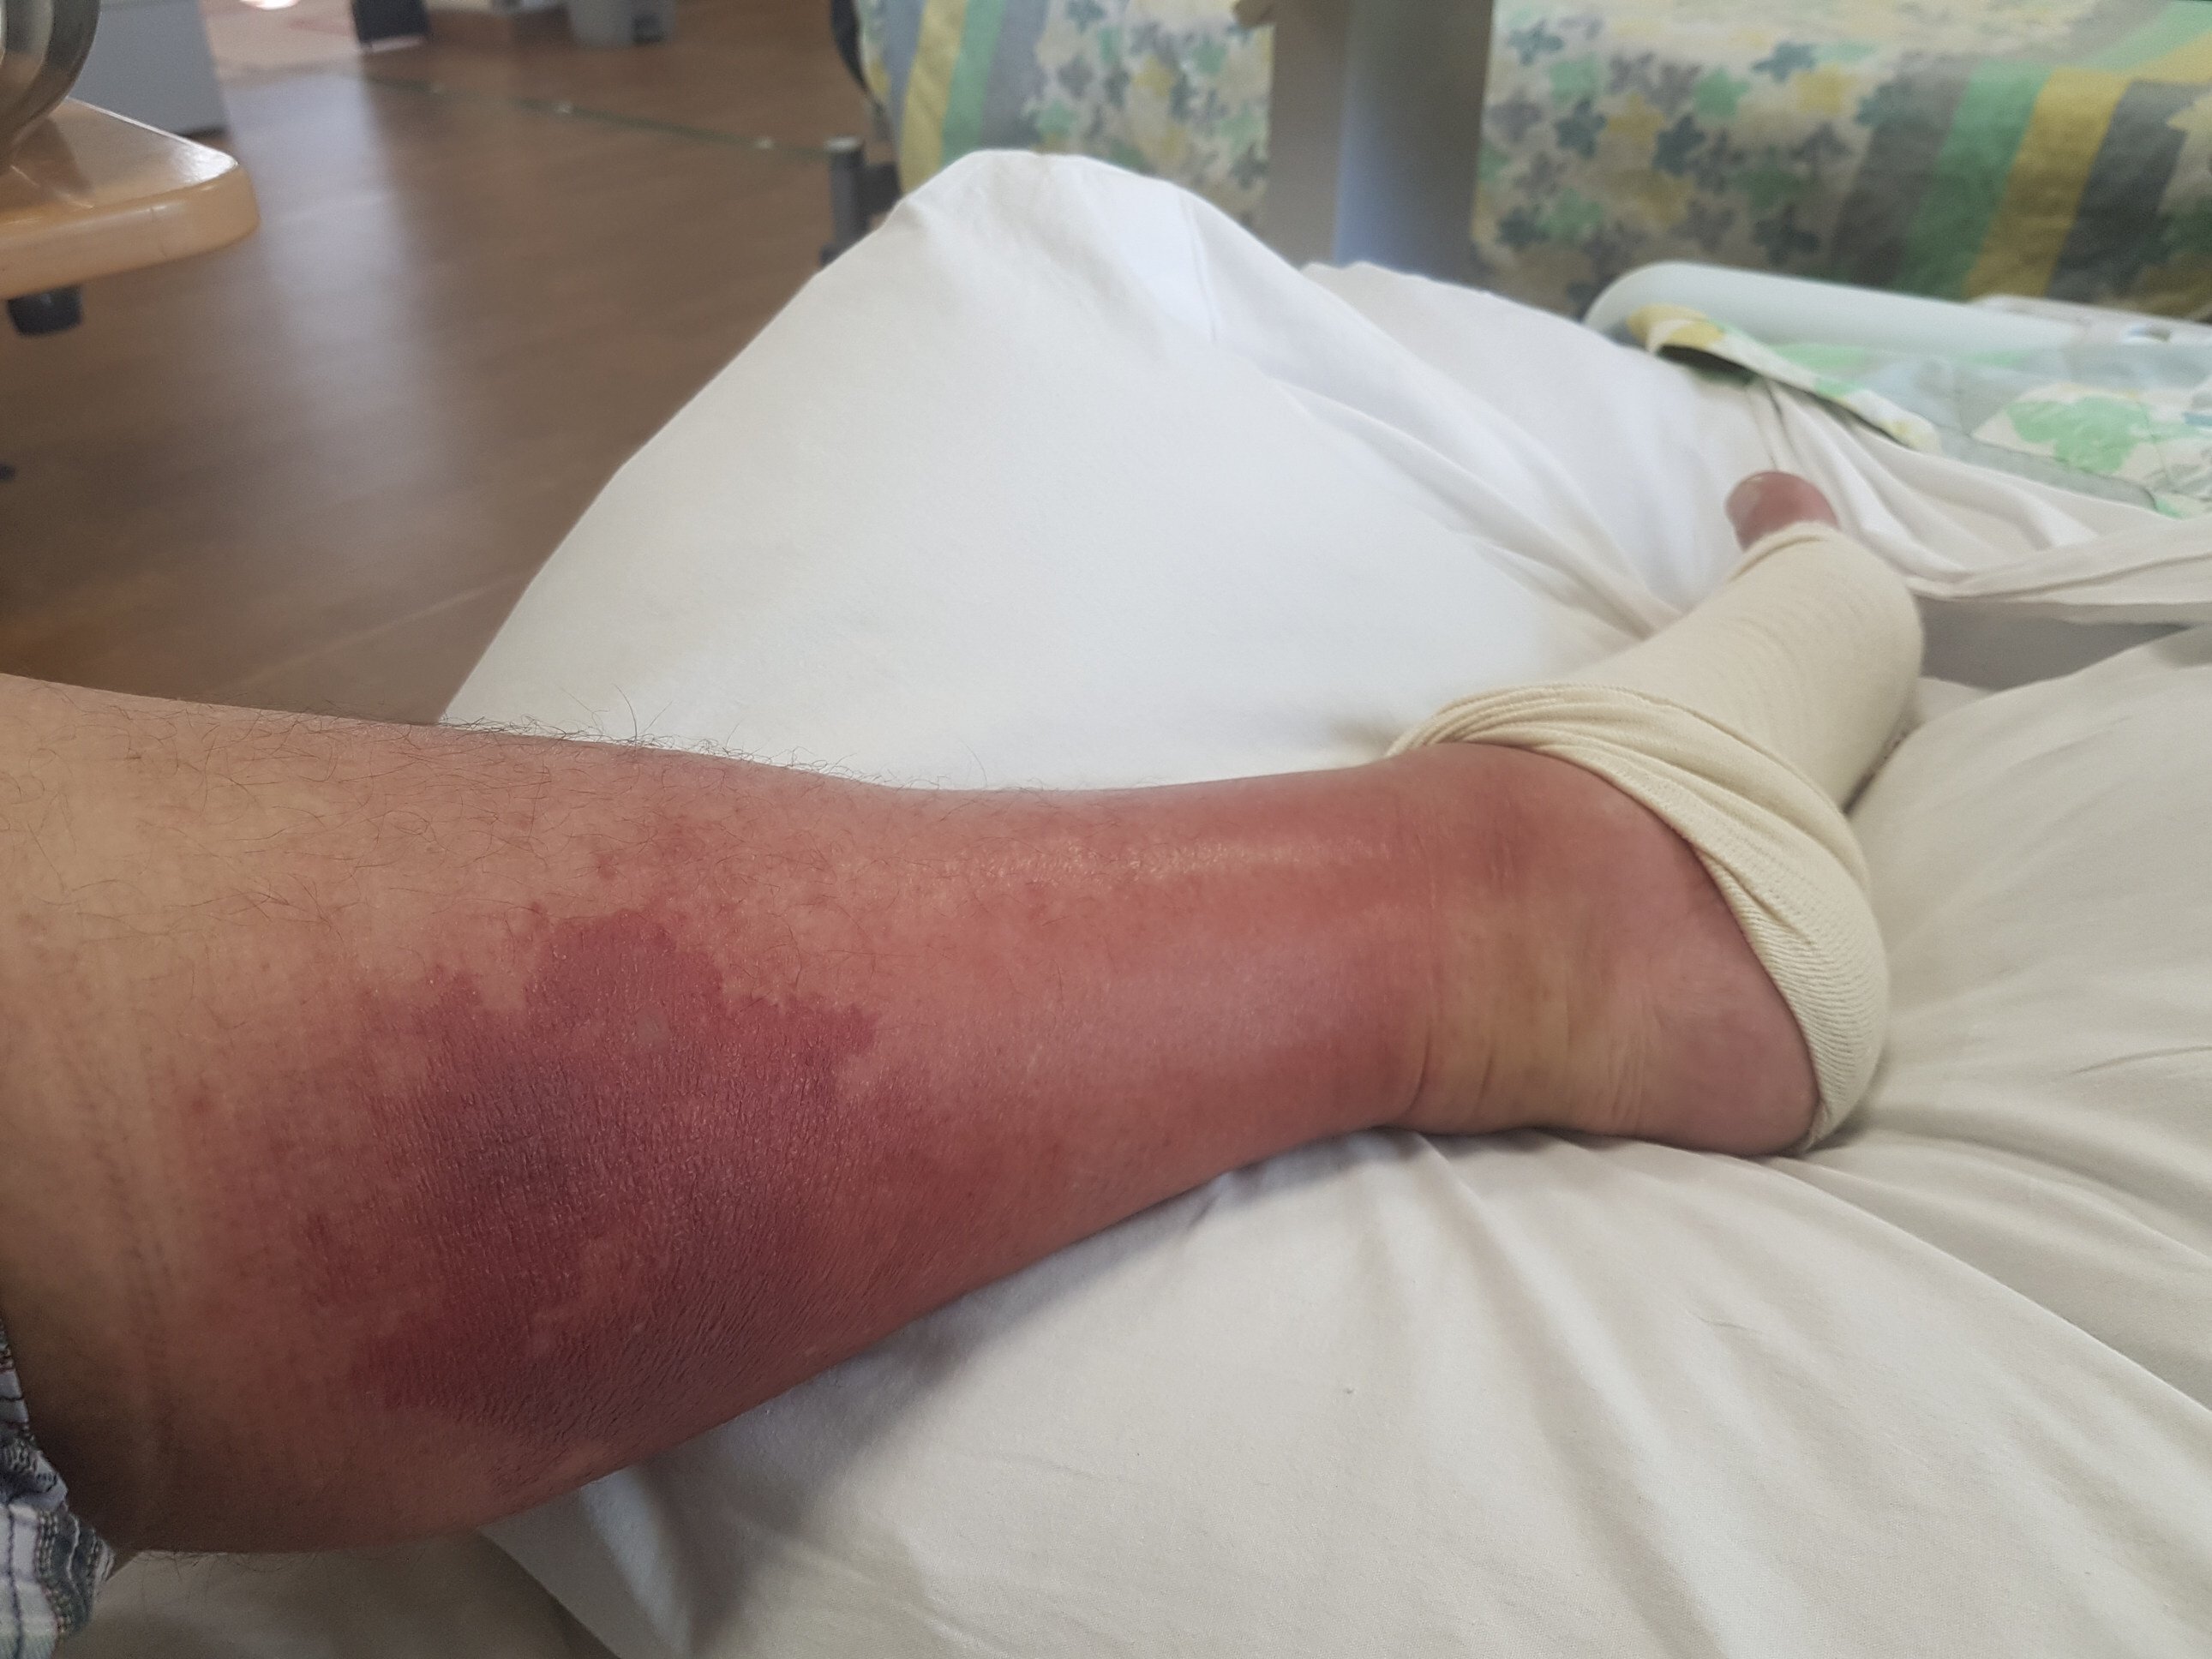 Martin Williams’ left leg doubled in size and turned purple after he contracted cellulitis, likely the result of stepping on a small sea creature at Cheung Sha beach on Lantau Island in Hong Kong. Photo: Martin Williams